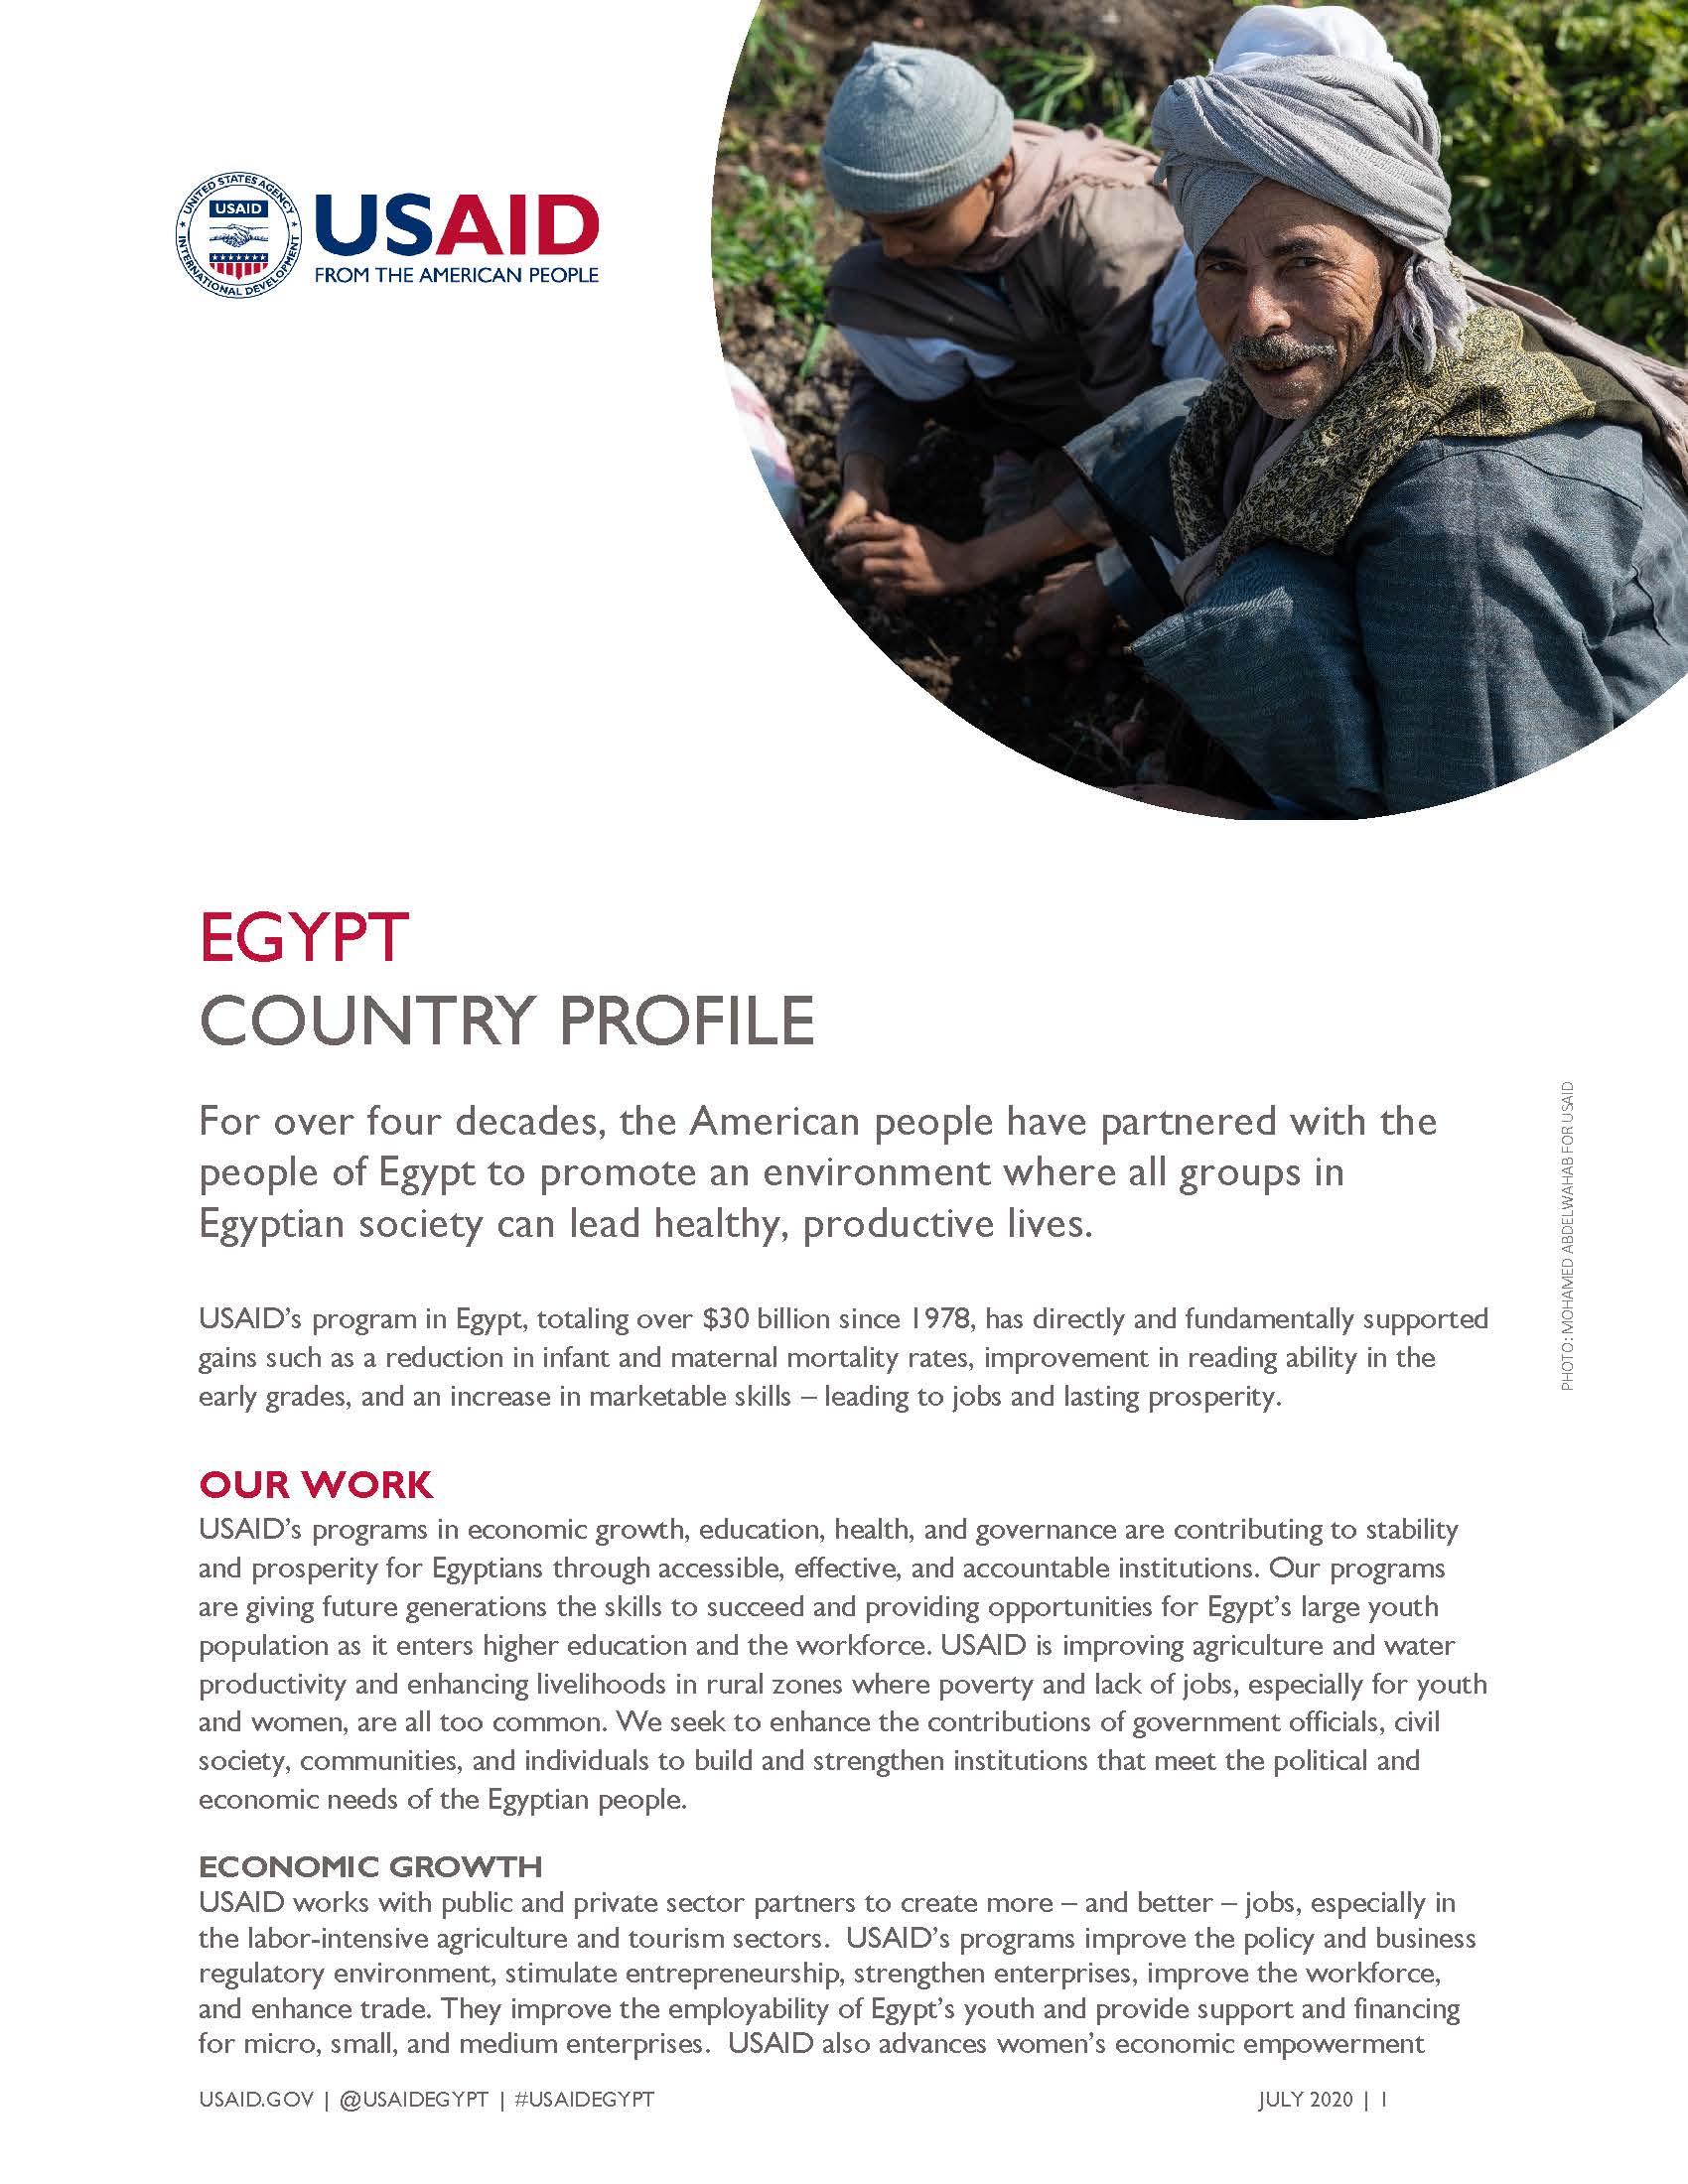 USAID/Egypt Fact Sheet: Country Profile